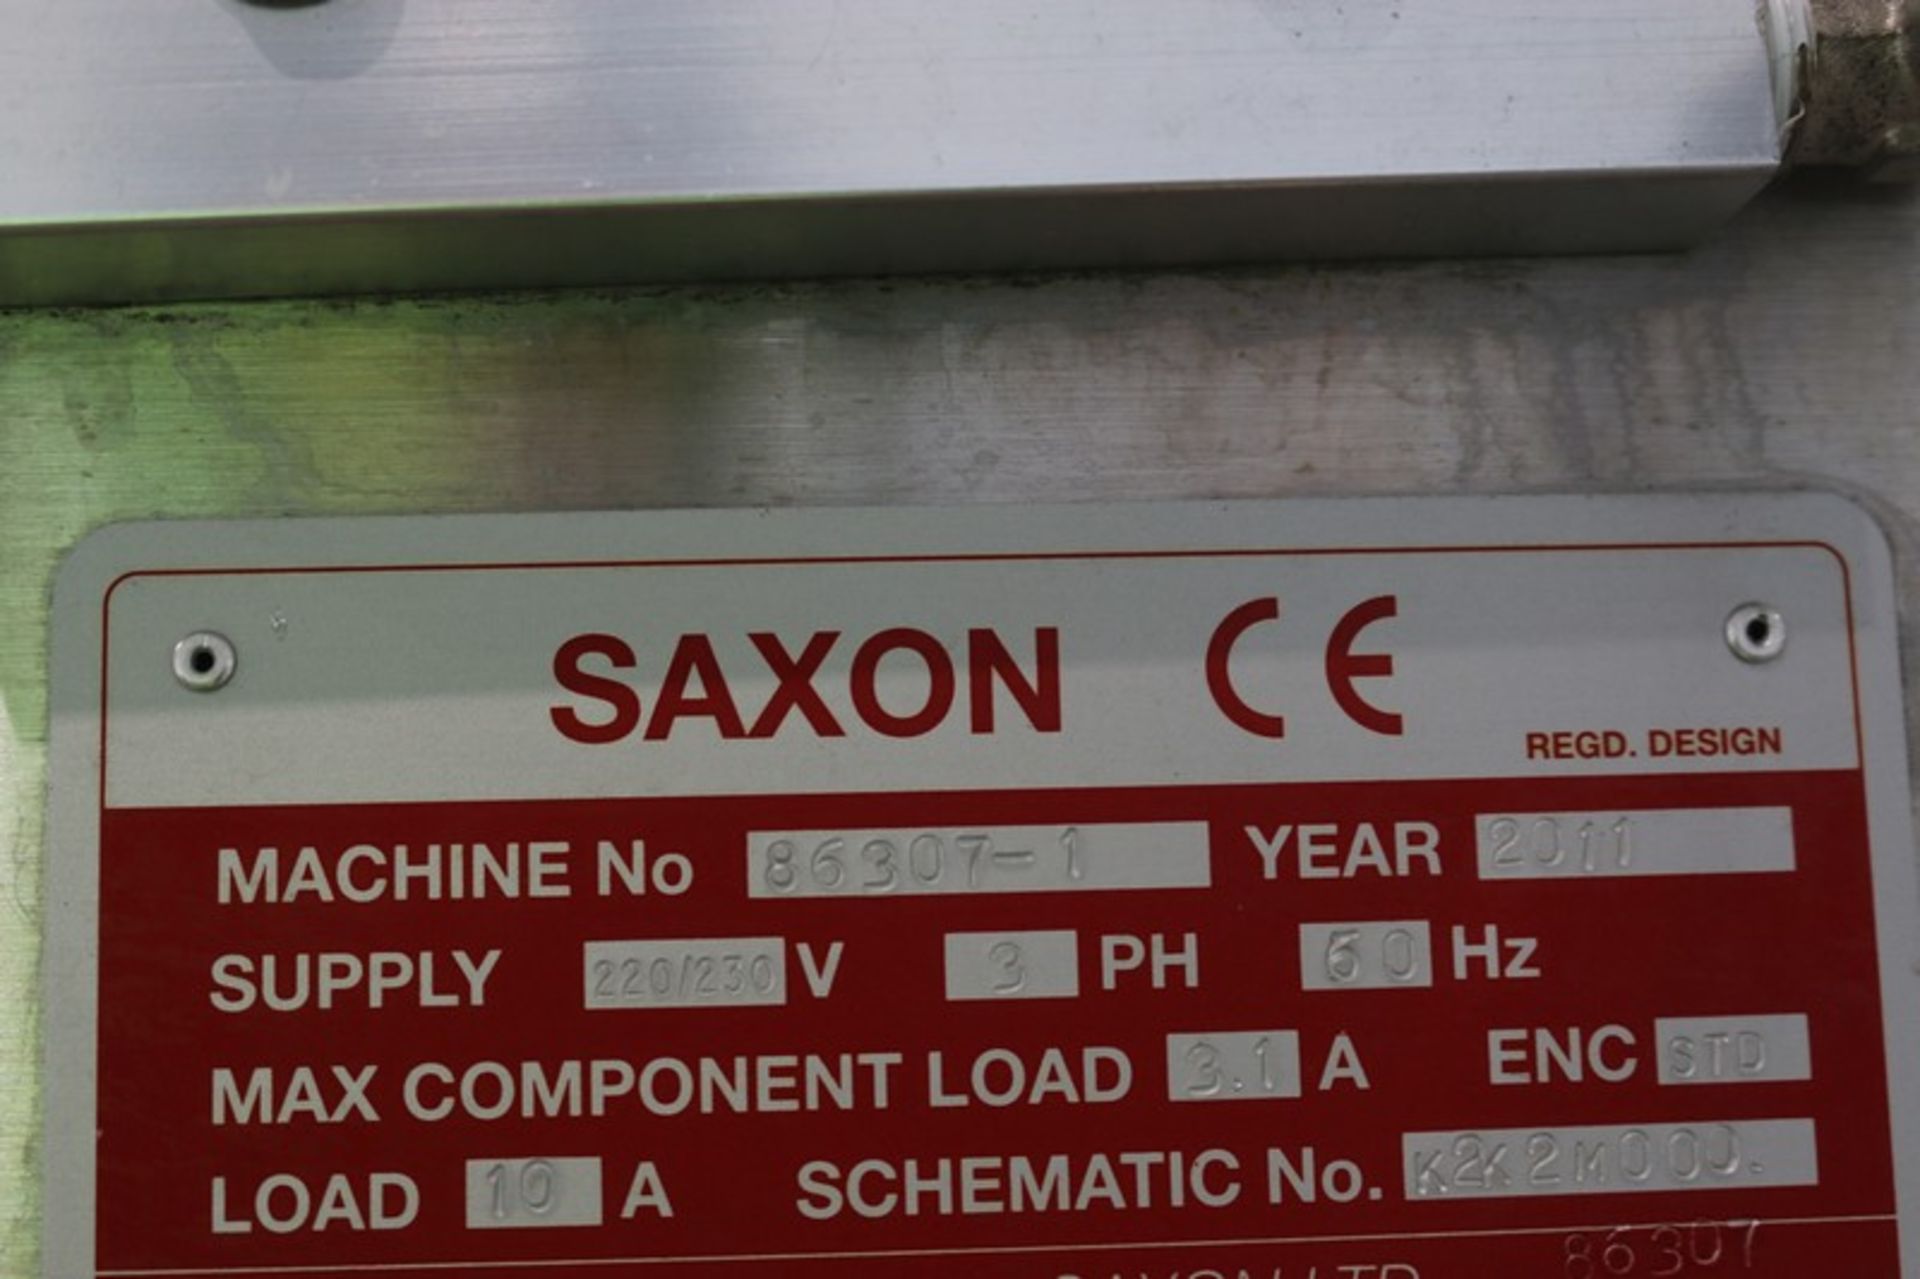 2011 Saxon Sealer,M/N 86307-1, 220/230 Volts, 3 Phase, with Aprox. 6" W Belt, Mounted S/S Frame ( - Image 7 of 9